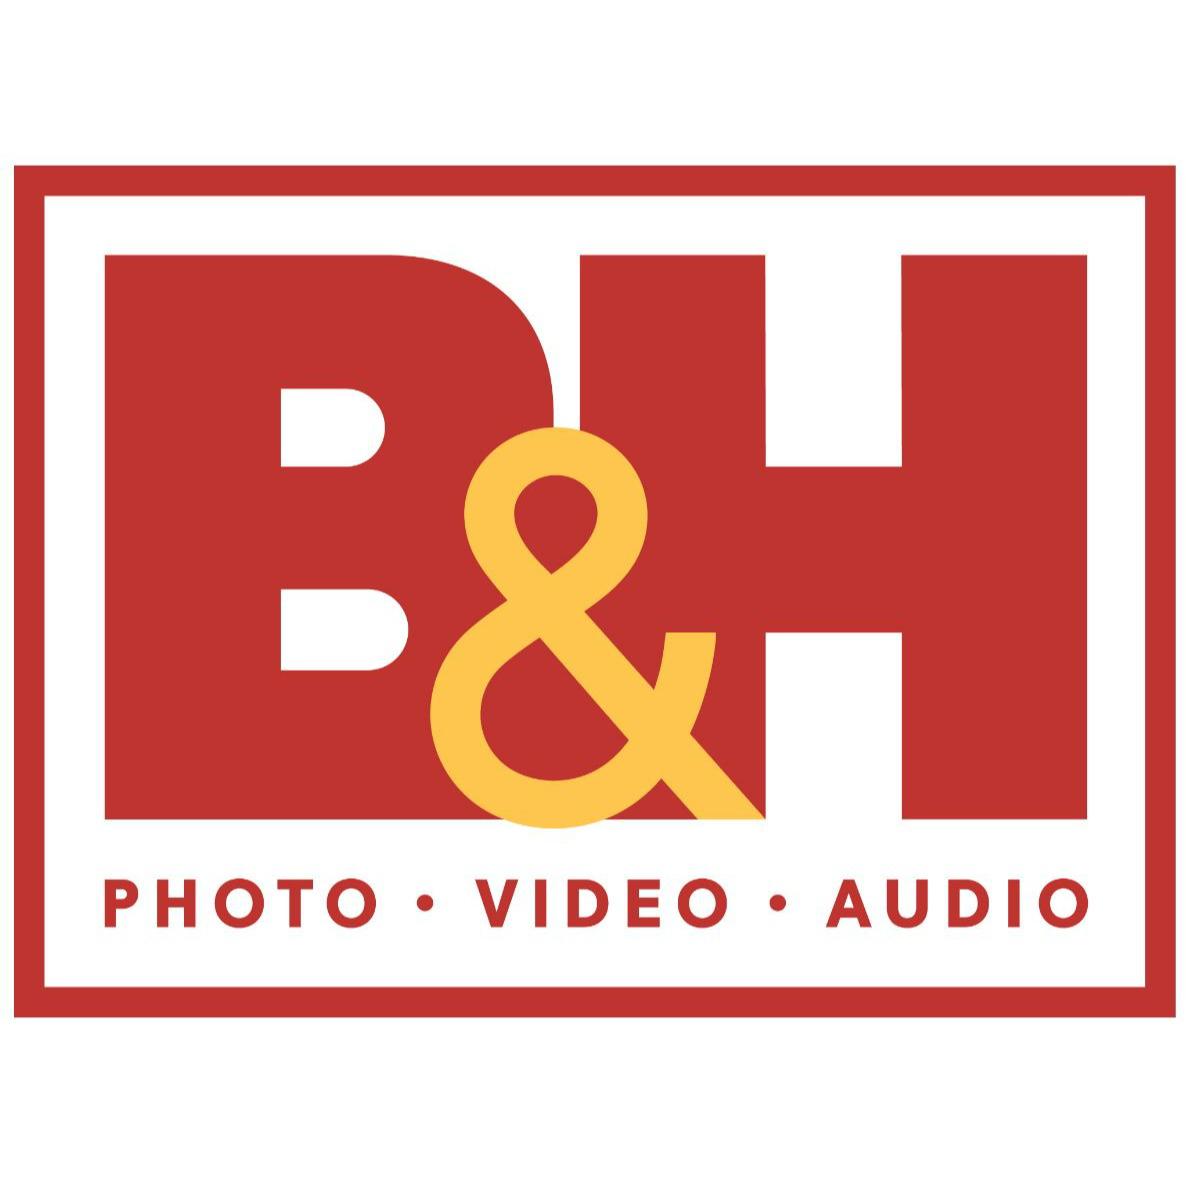 B&H Photo Video - Electronics and Camera Store - New York, NY 10001 - (212)615-8820 | ShowMeLocal.com